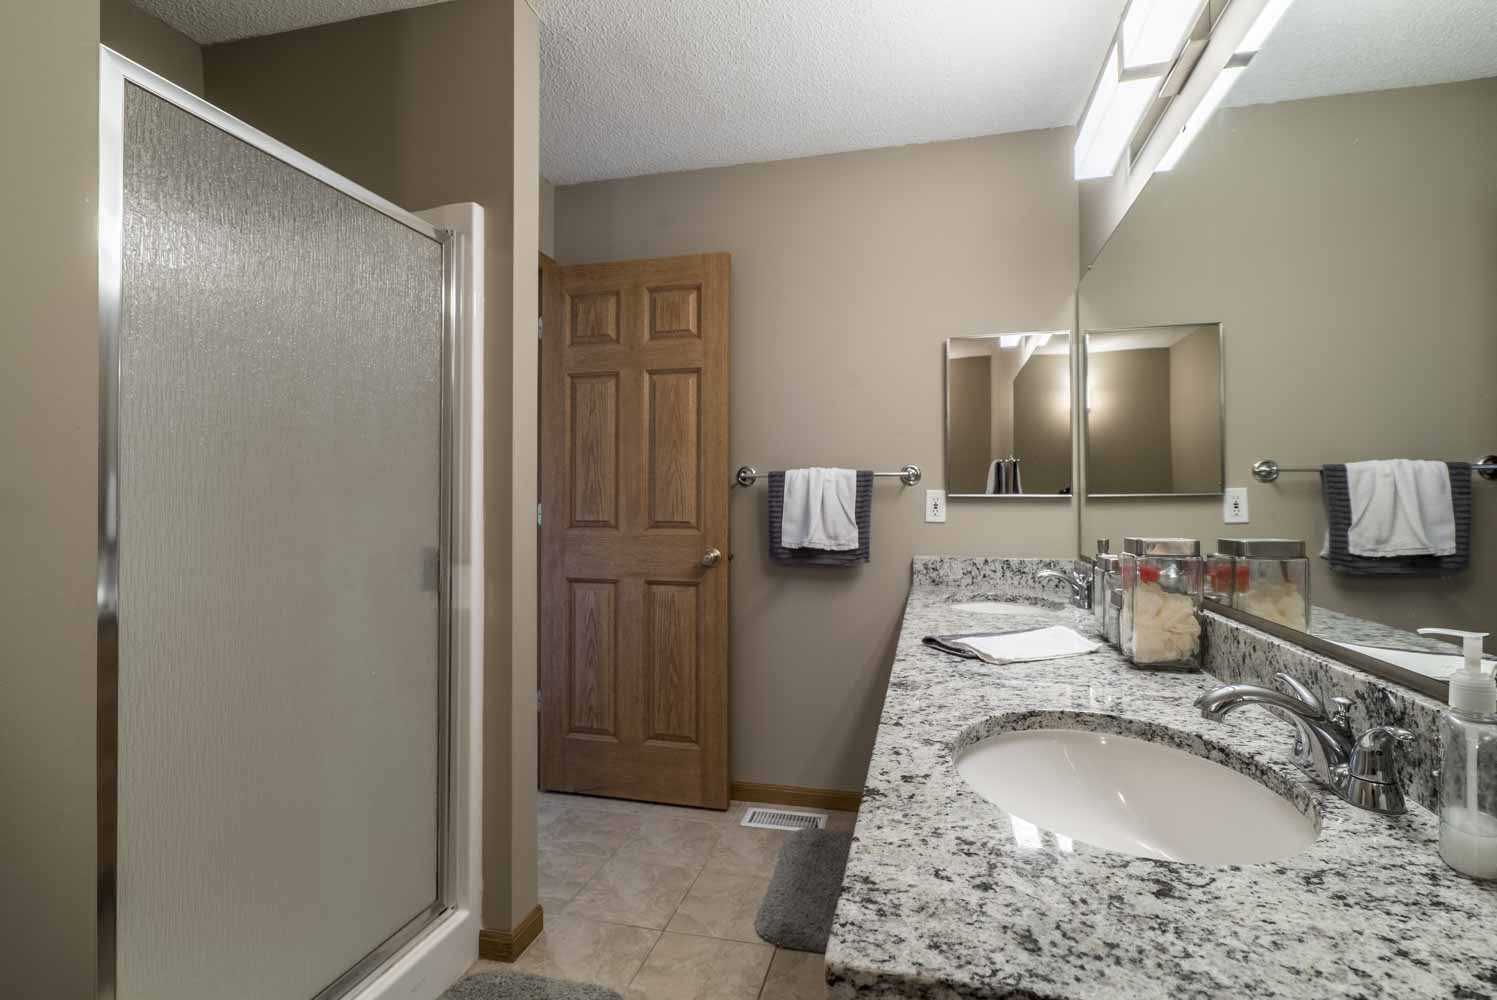 Master bath with shower and tub at at Southwind Villas in southwest Omaha in La Vista, NE, 68128